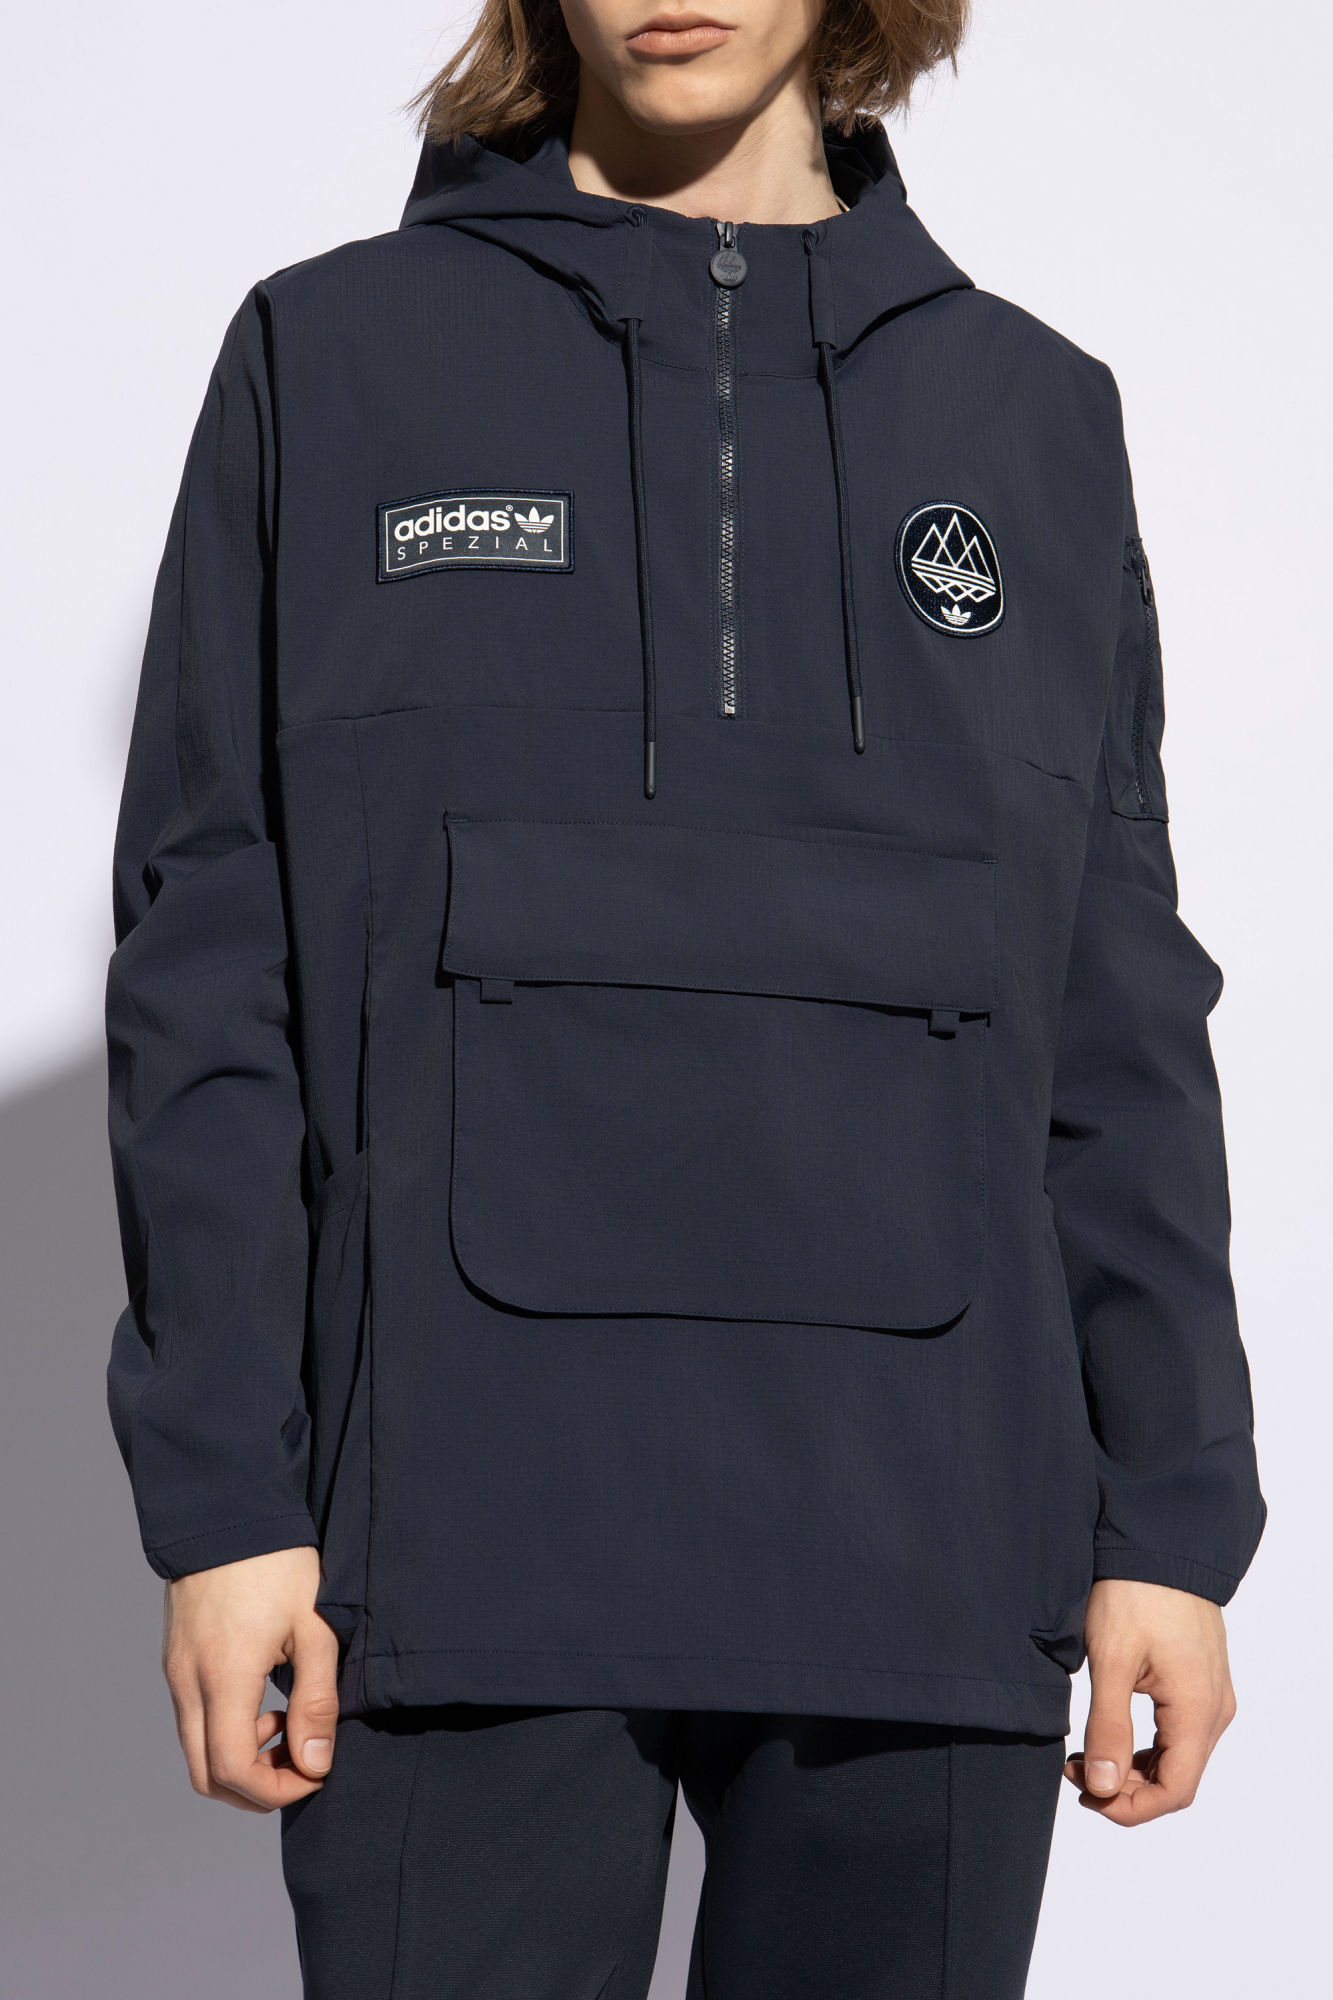 Navy blue Jacket from the 'Spezial' collection ADIDAS Originals 